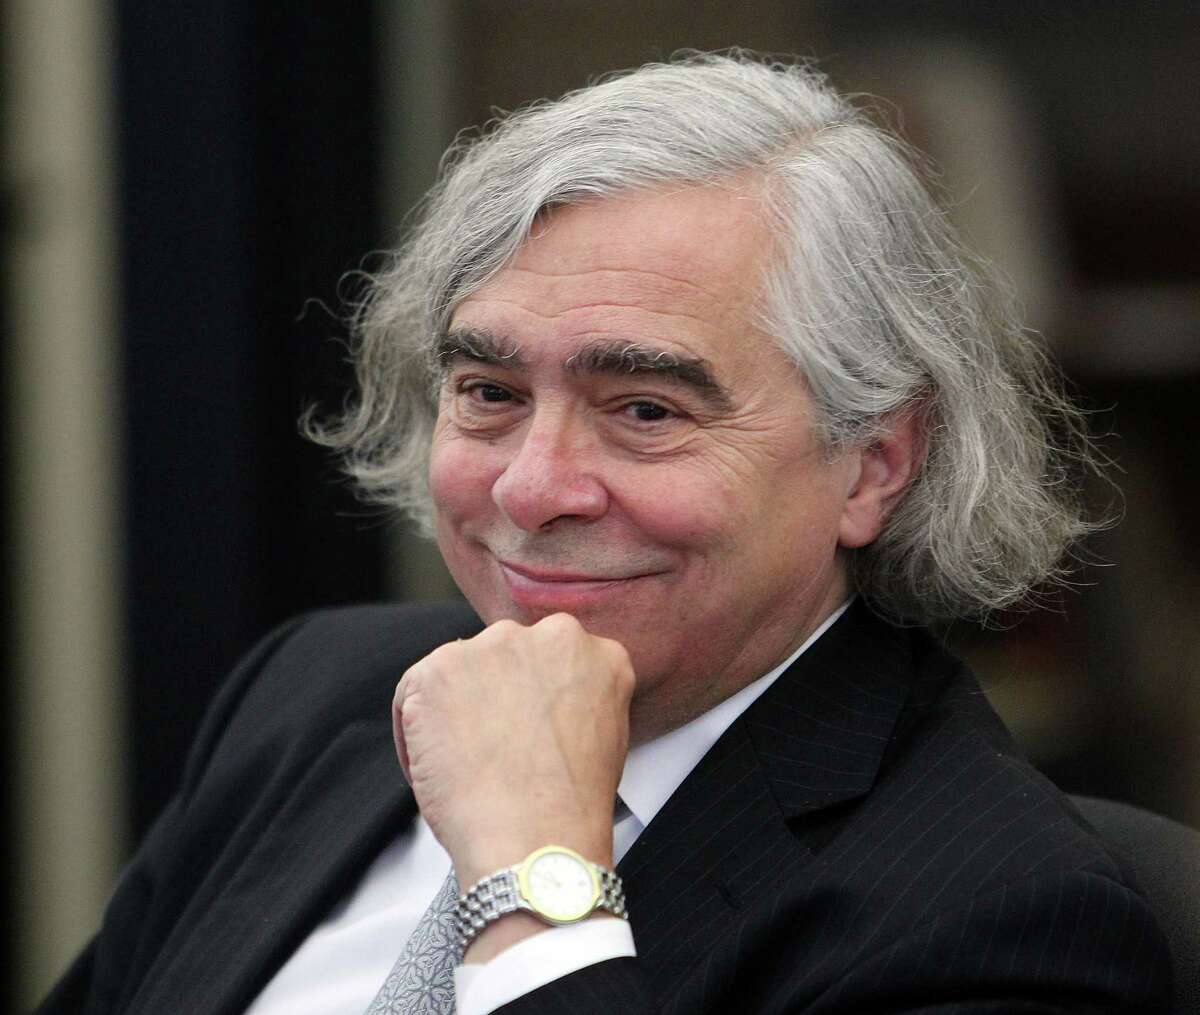 U.S. Energy Secretary Ernest Moniz during his visit to our editorial board Thursday October 9, 2014. (Billy Smith II / Chronicle)